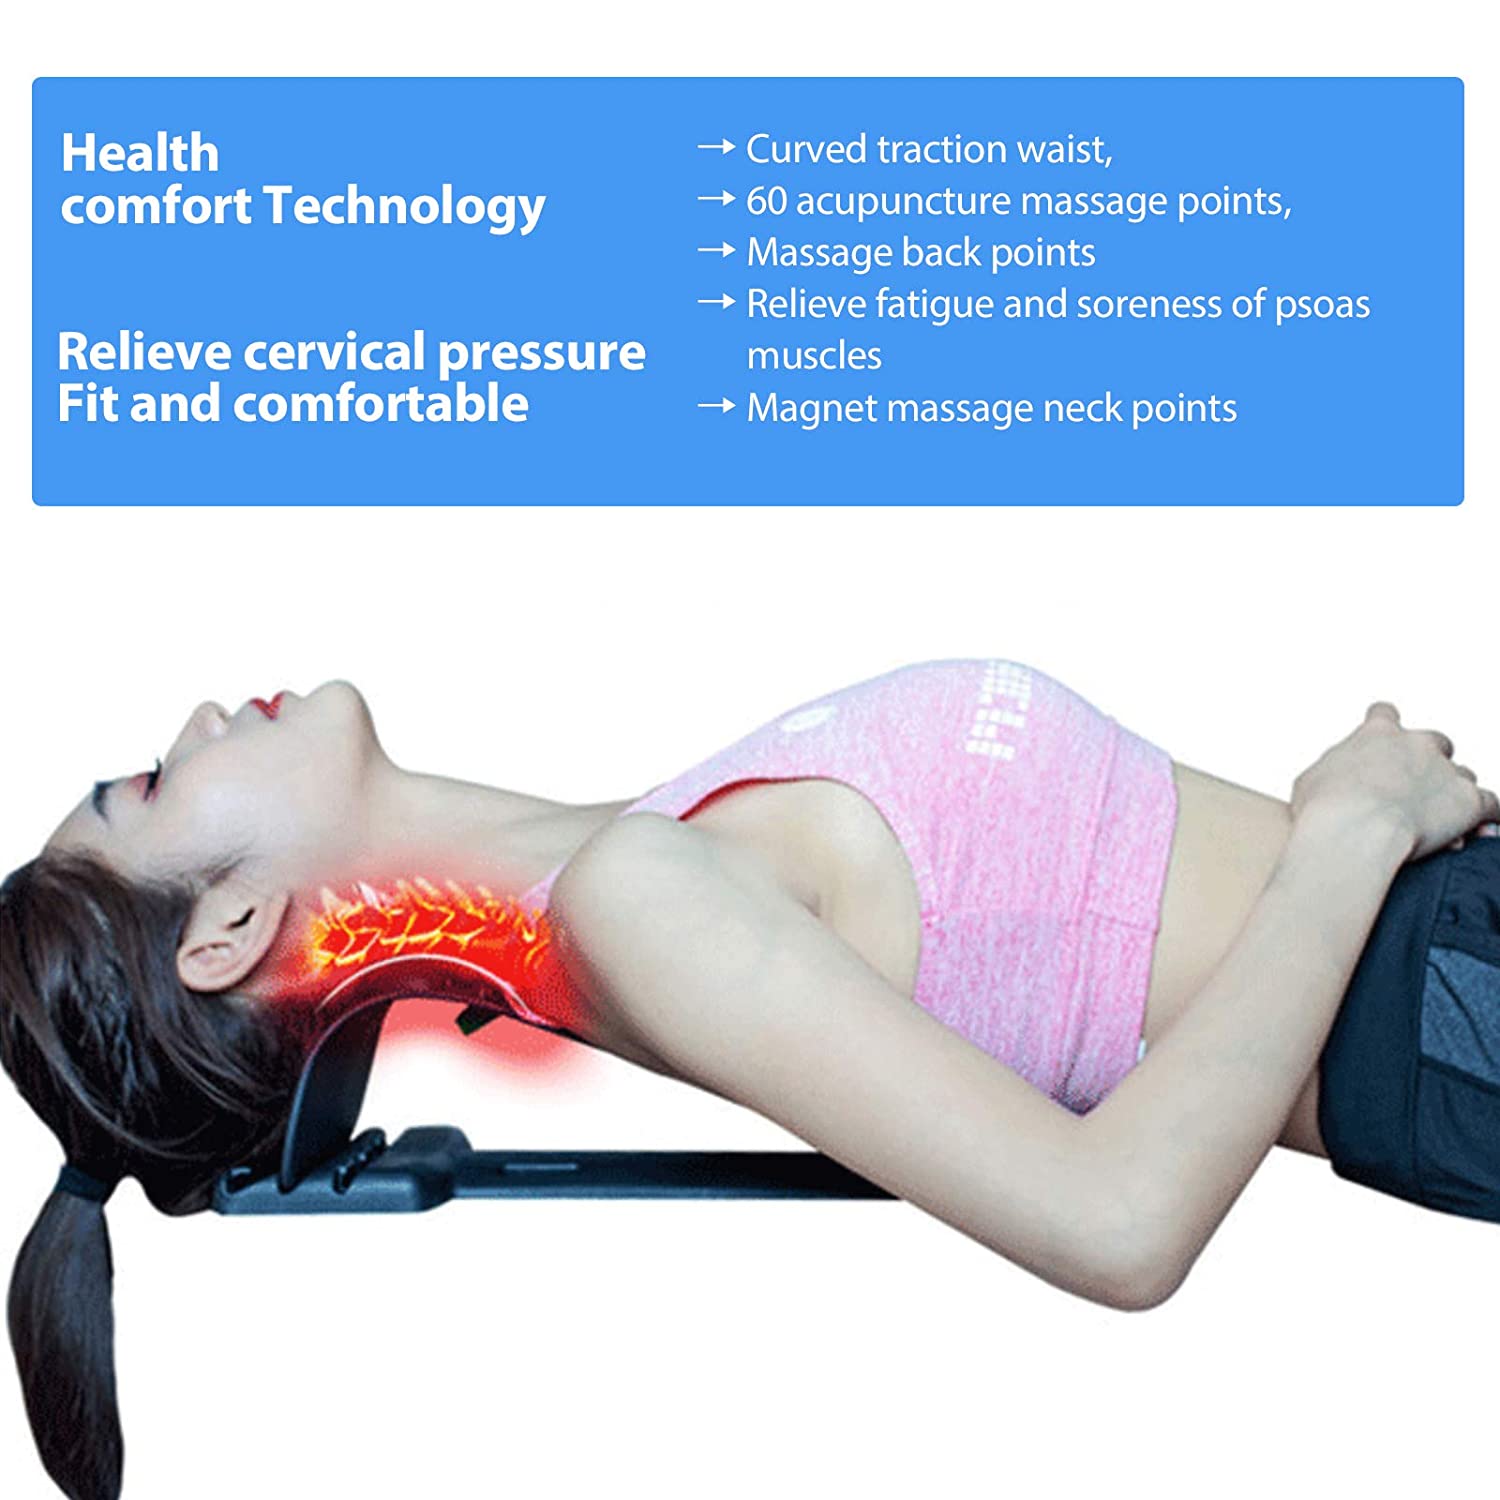 Back-Stretcher-Neck-Massage-Spine-Board-for-Lumbar-Pain-Muscle-Relief-Support-with-3-Stretching-Leve-1840114-1